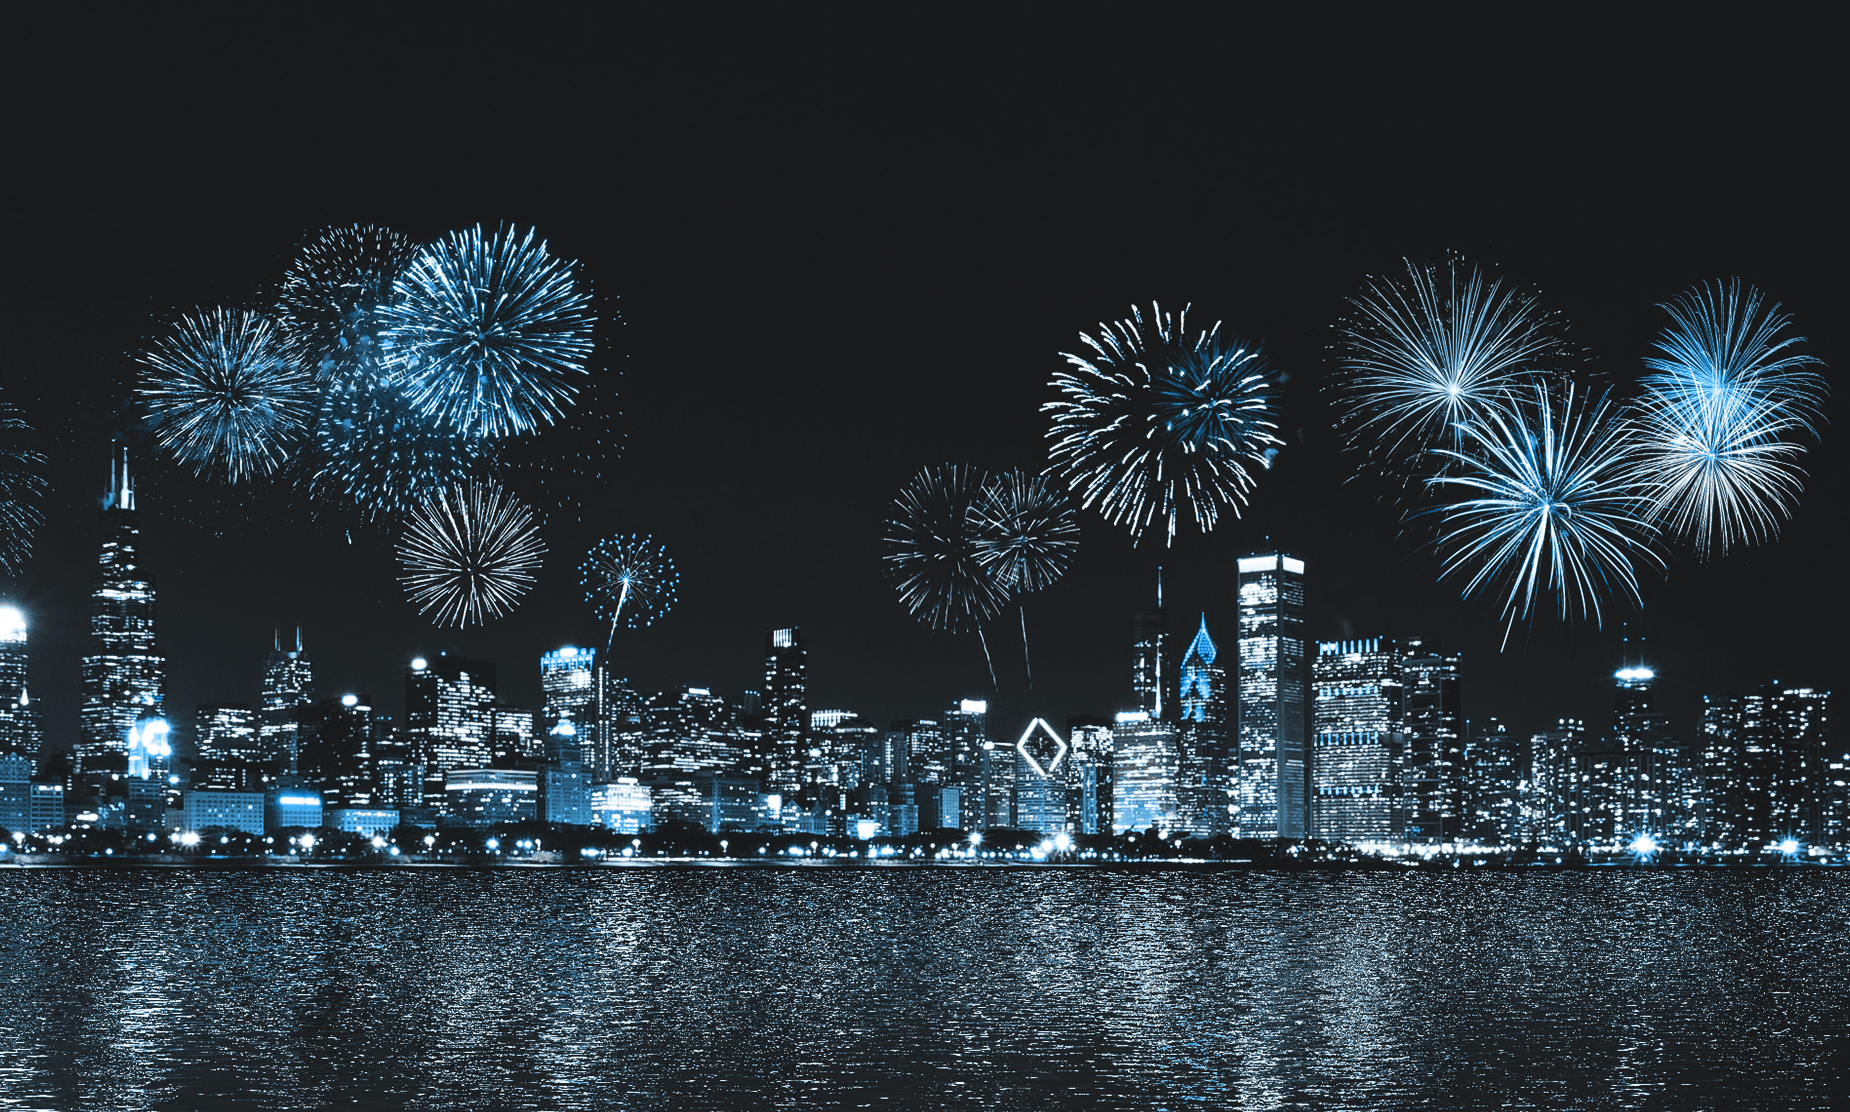 Fireworks in the City